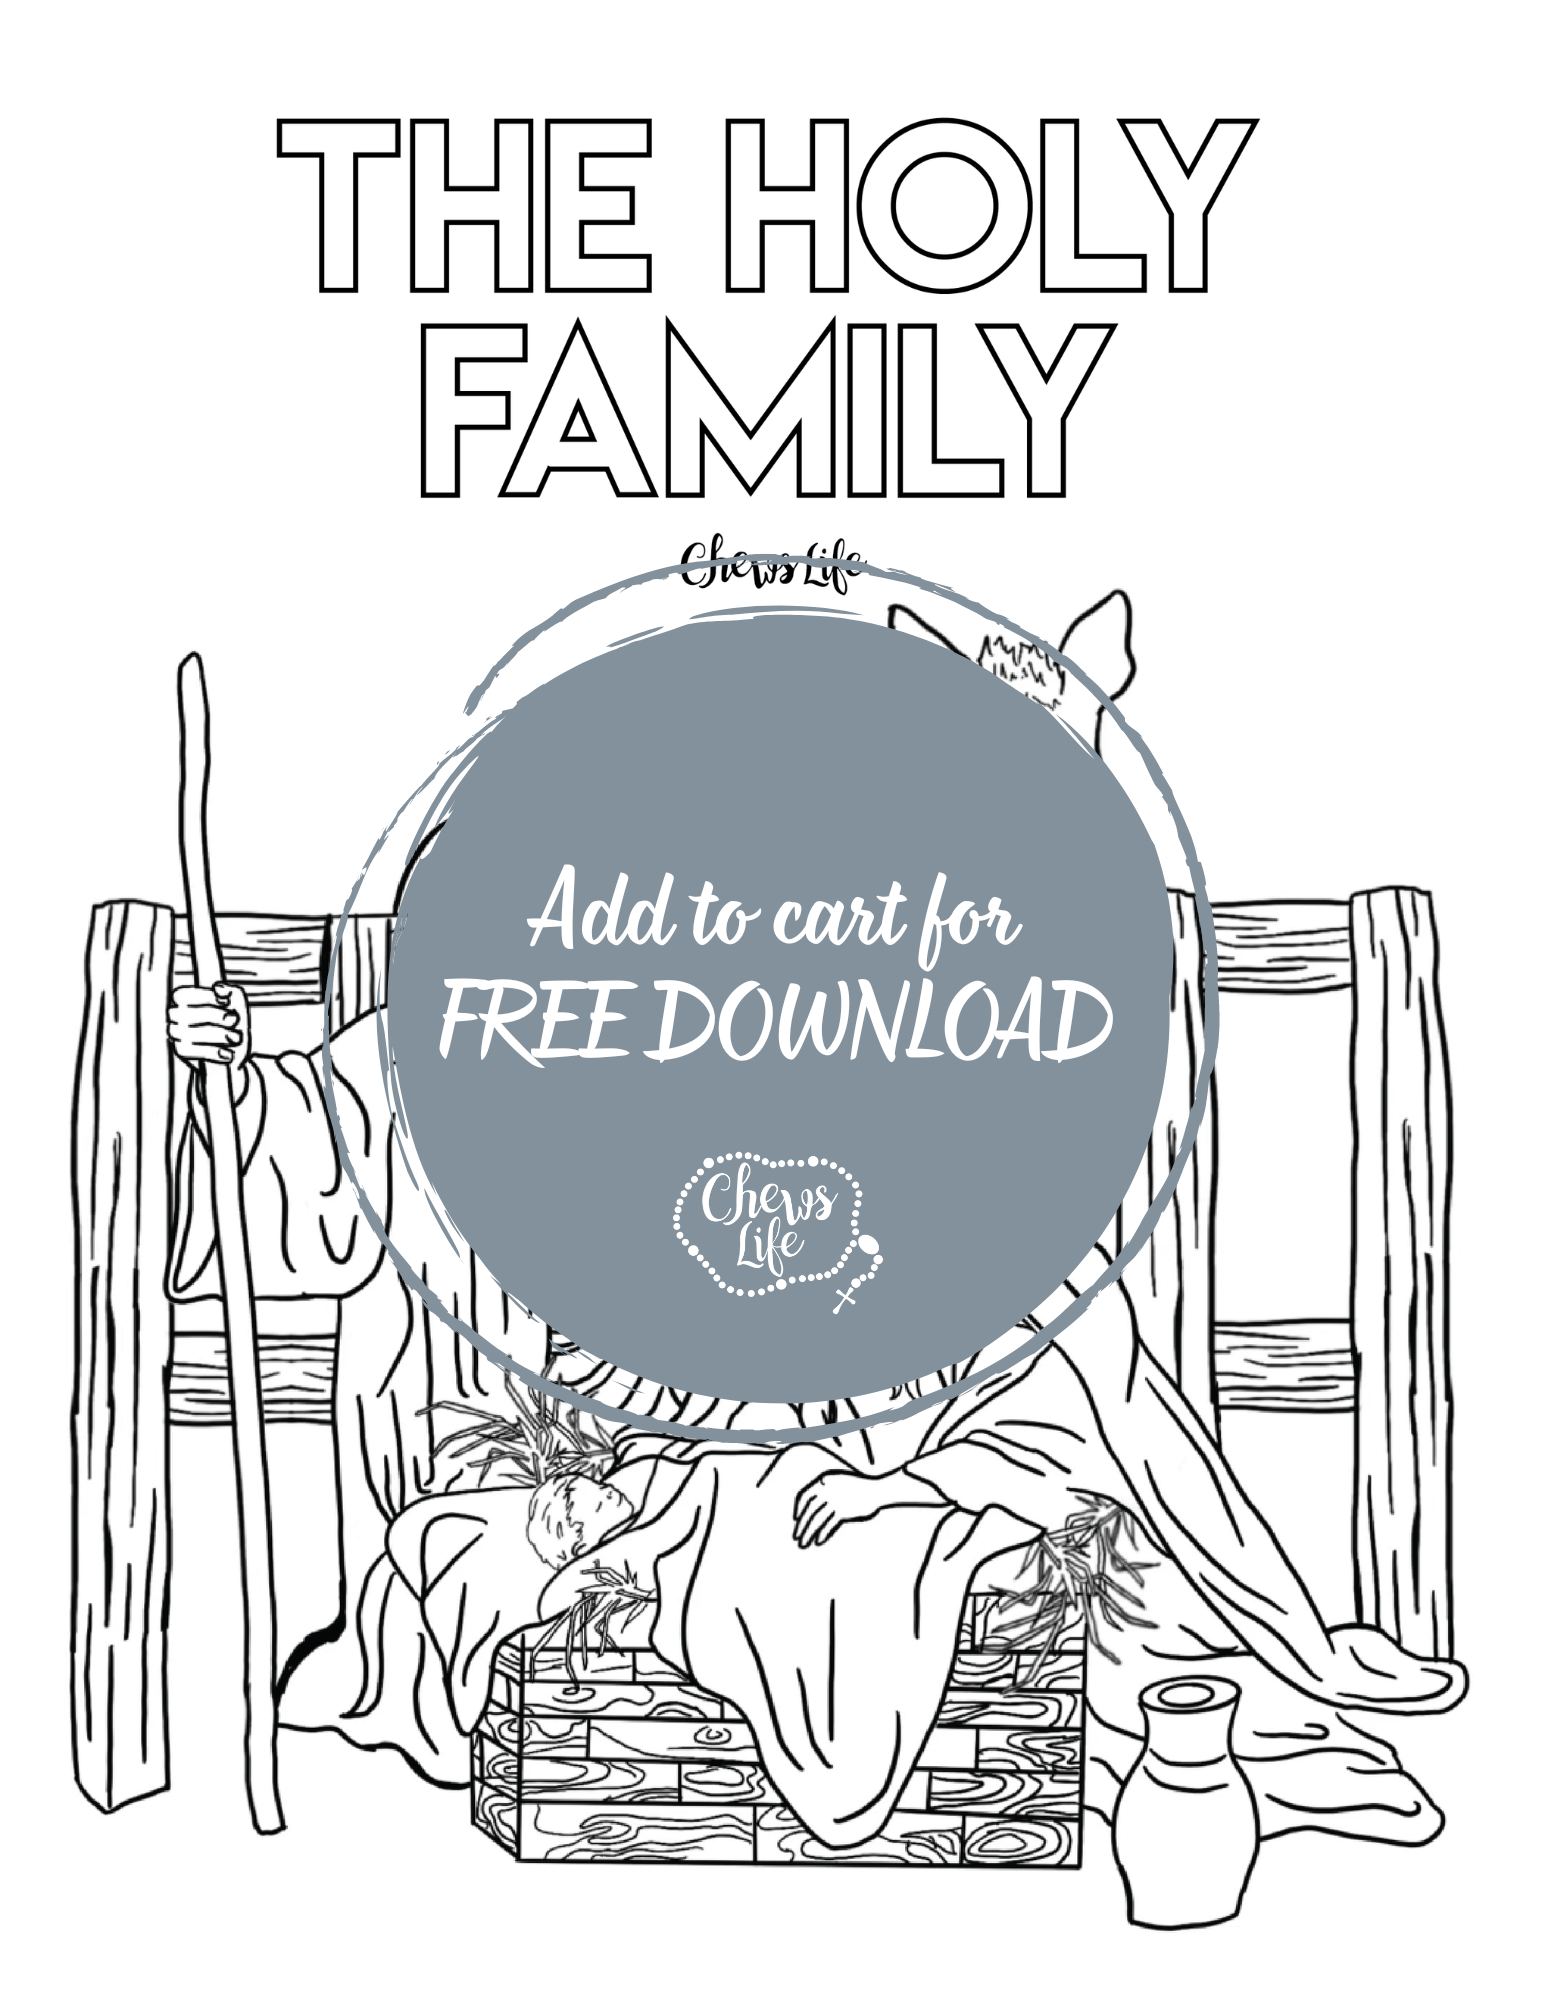 Holy family coloring page downloadable